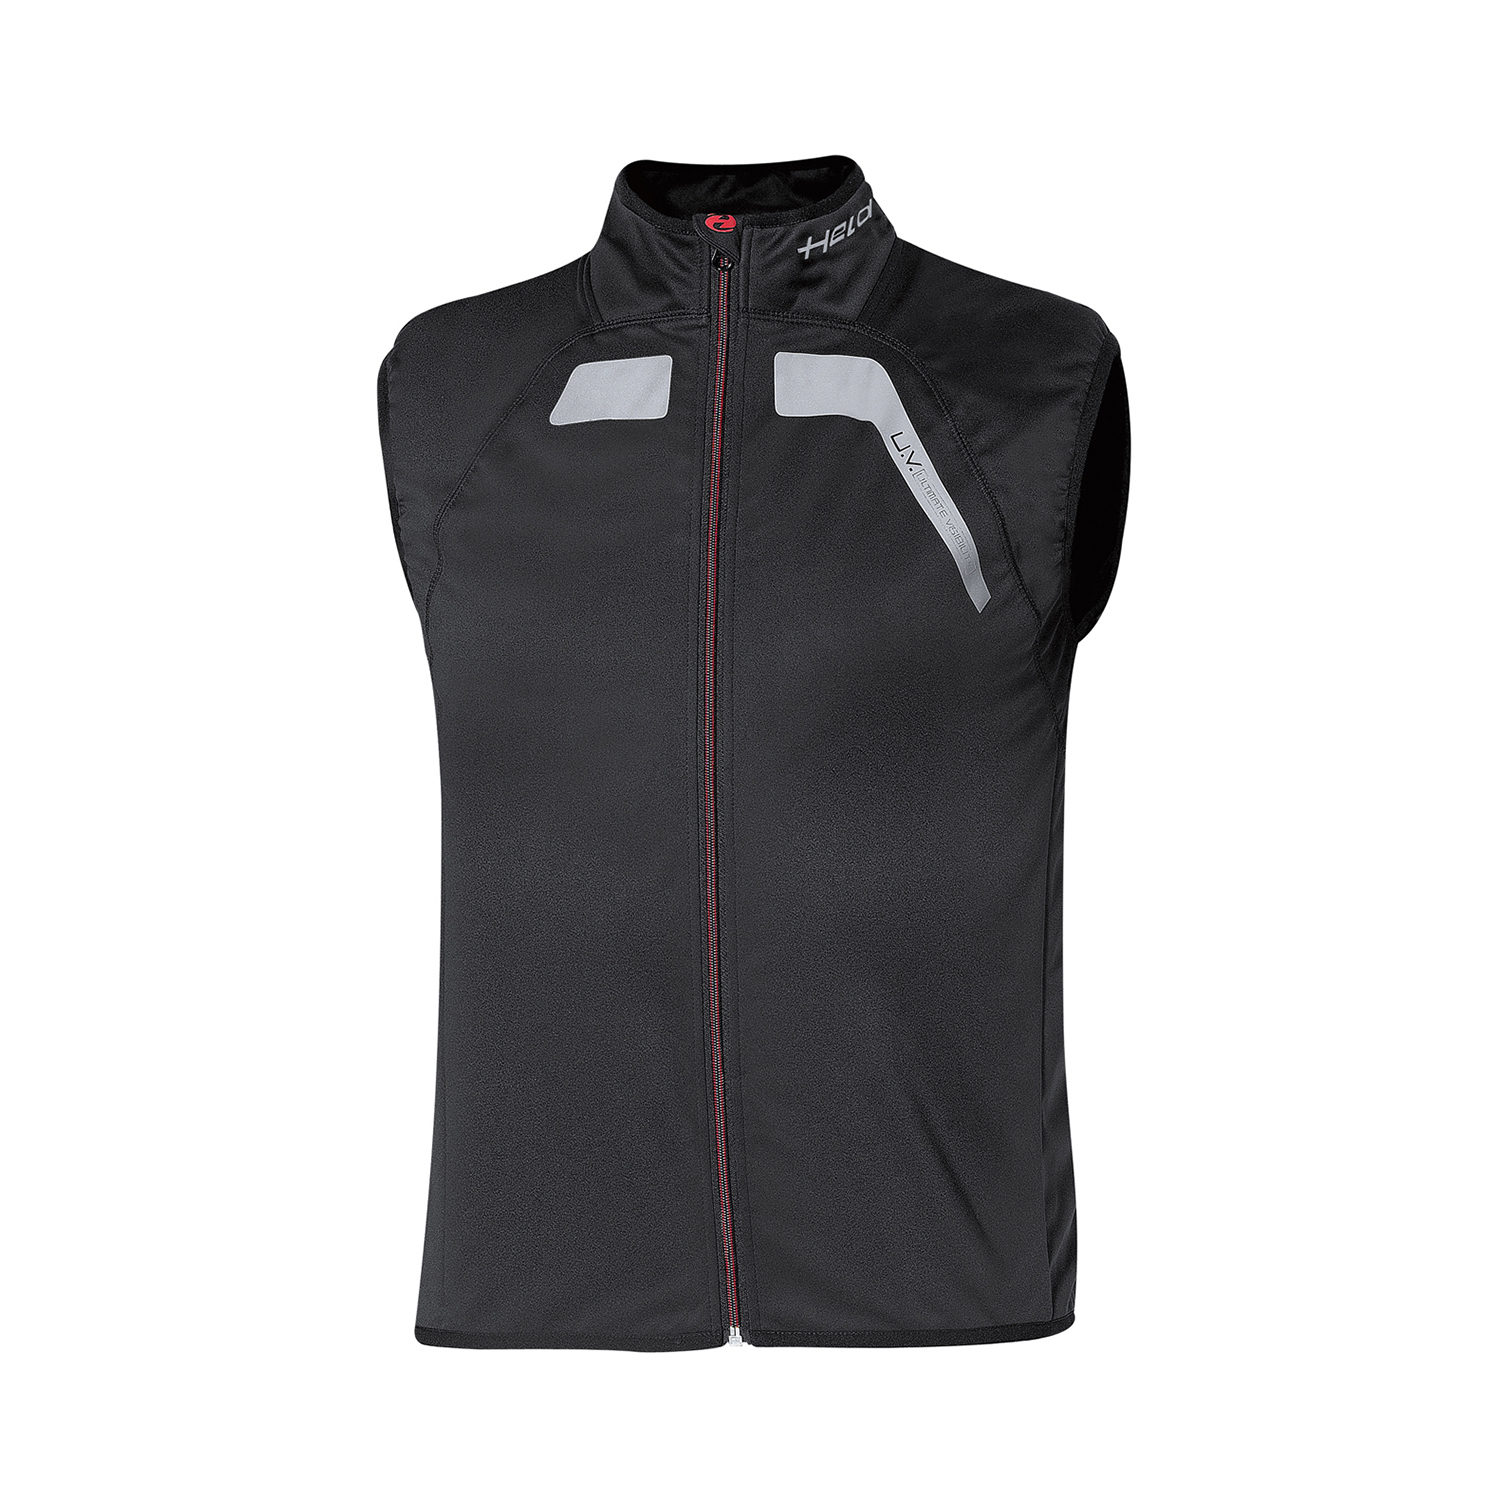 Held Softshell Vest - Available in Various Sizes